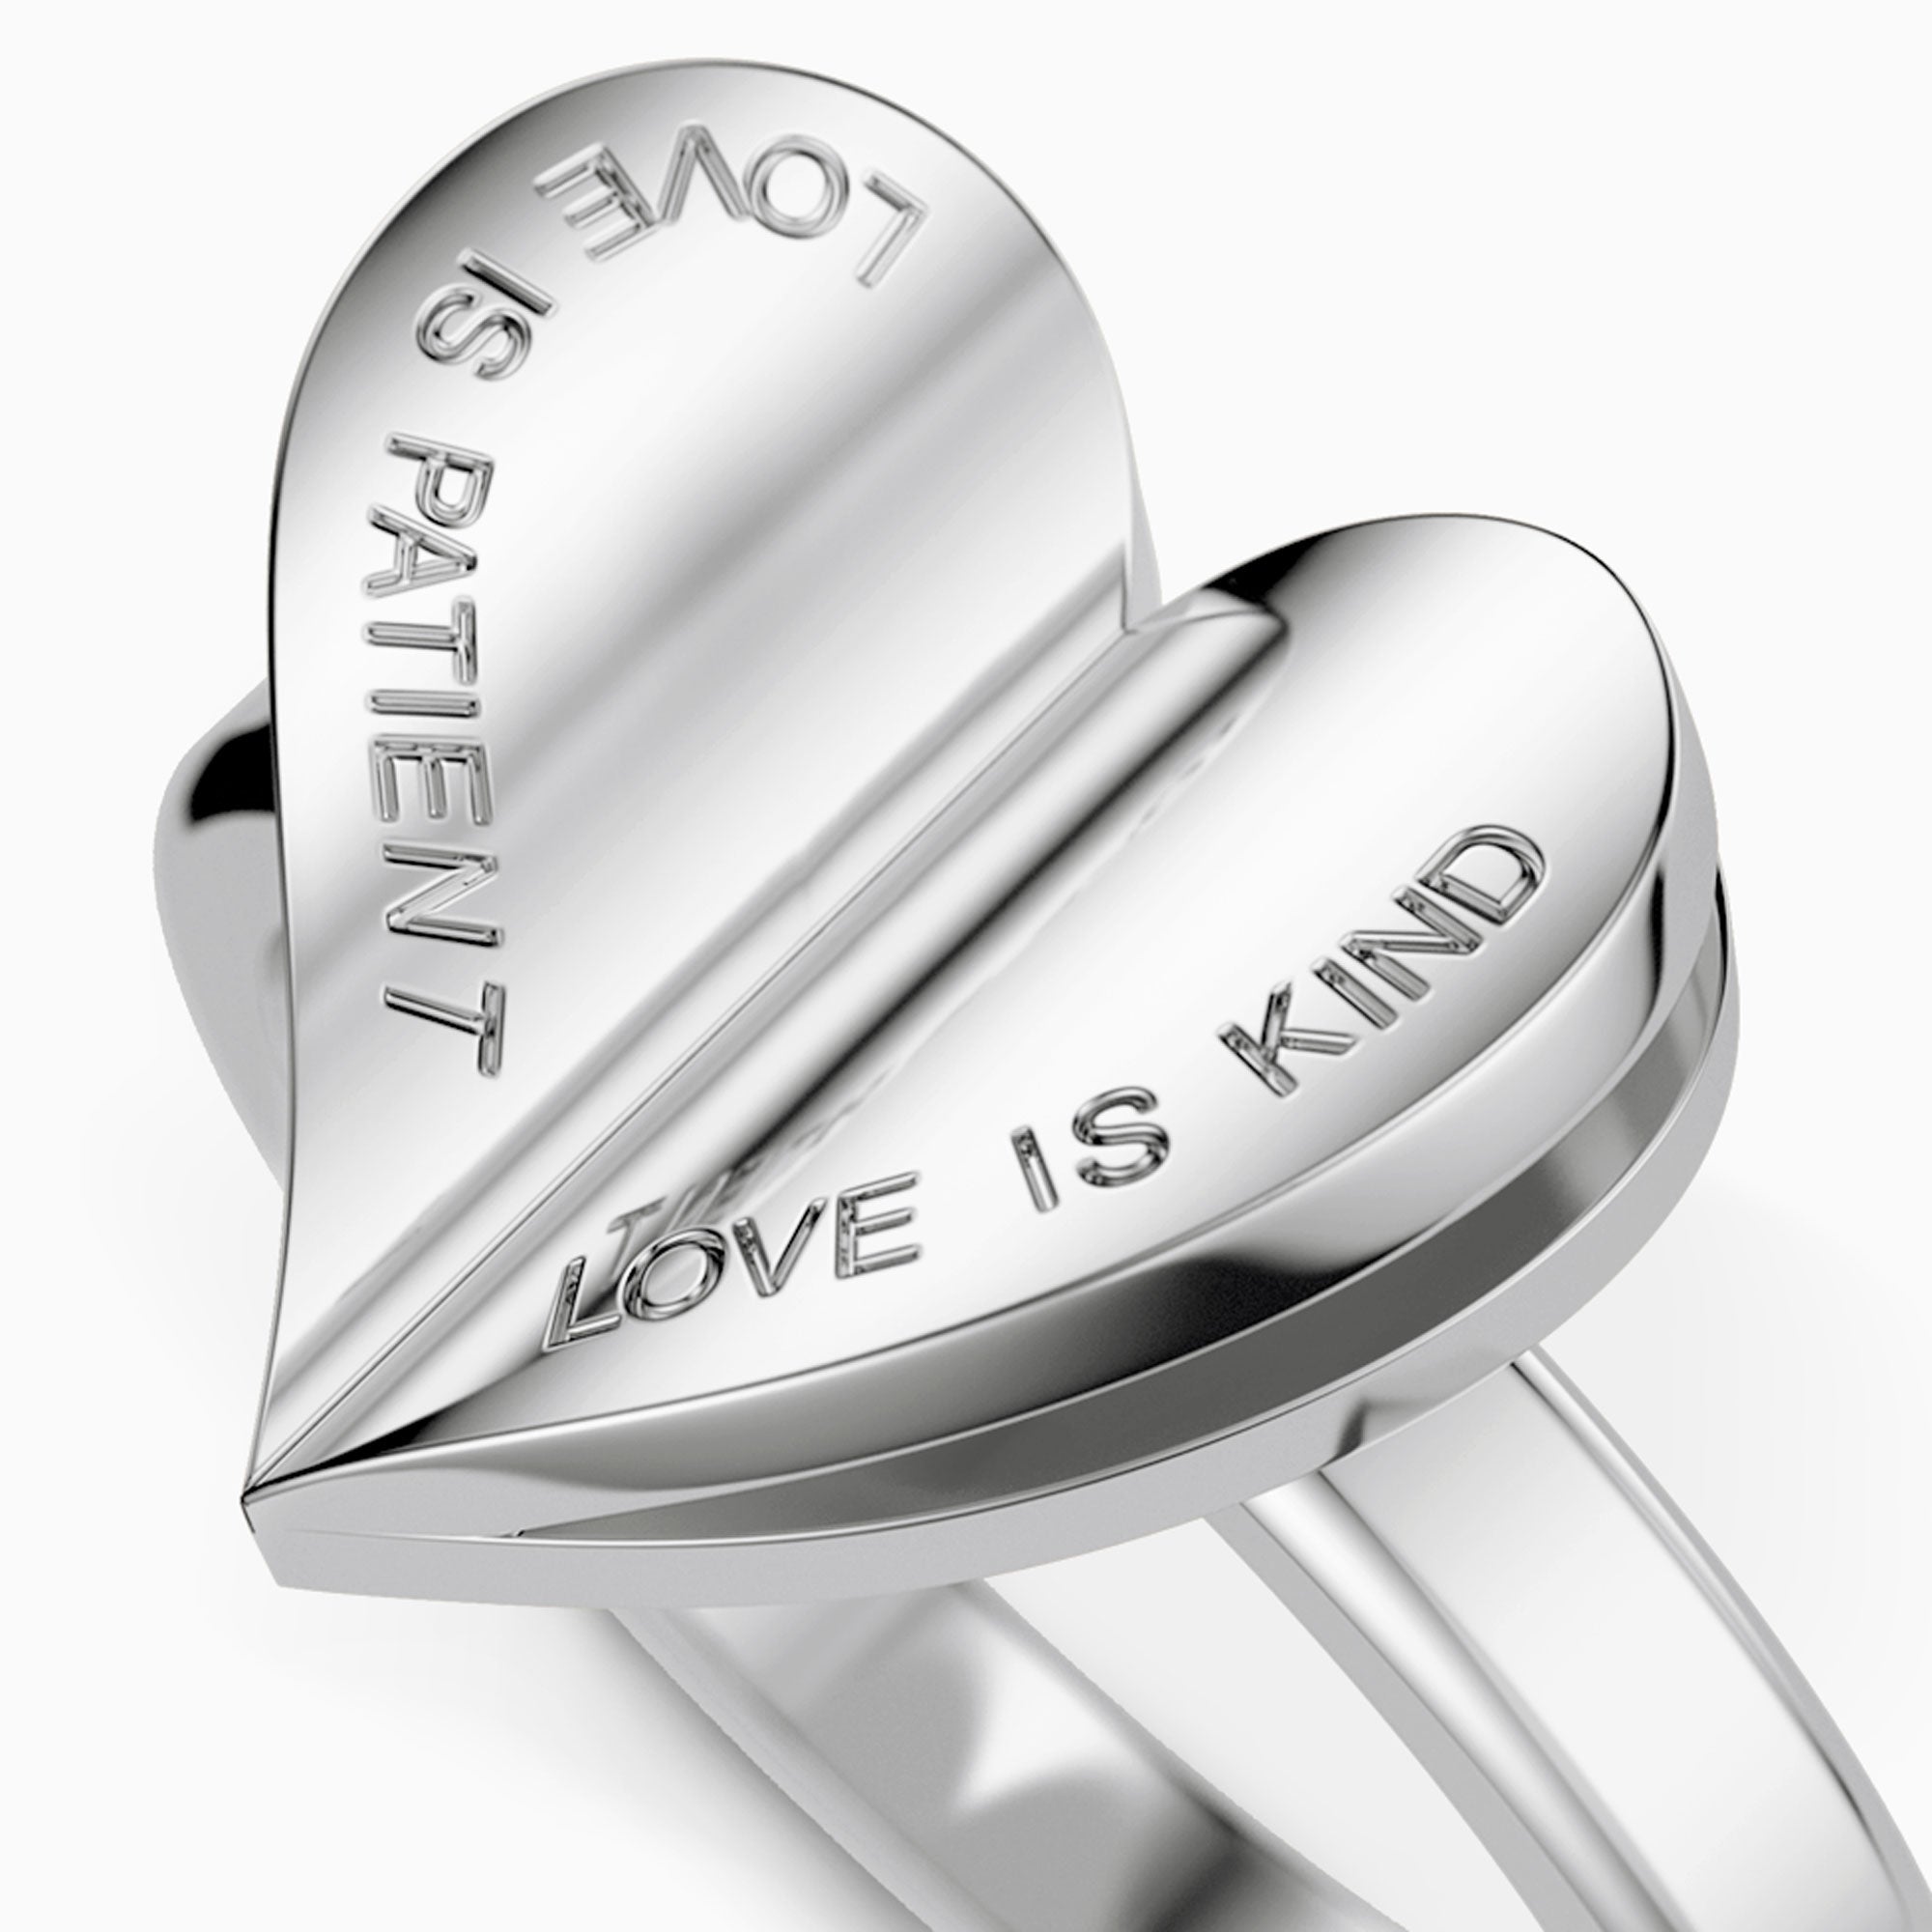 Chapters of Love Engraved Statement Ring - vanimy